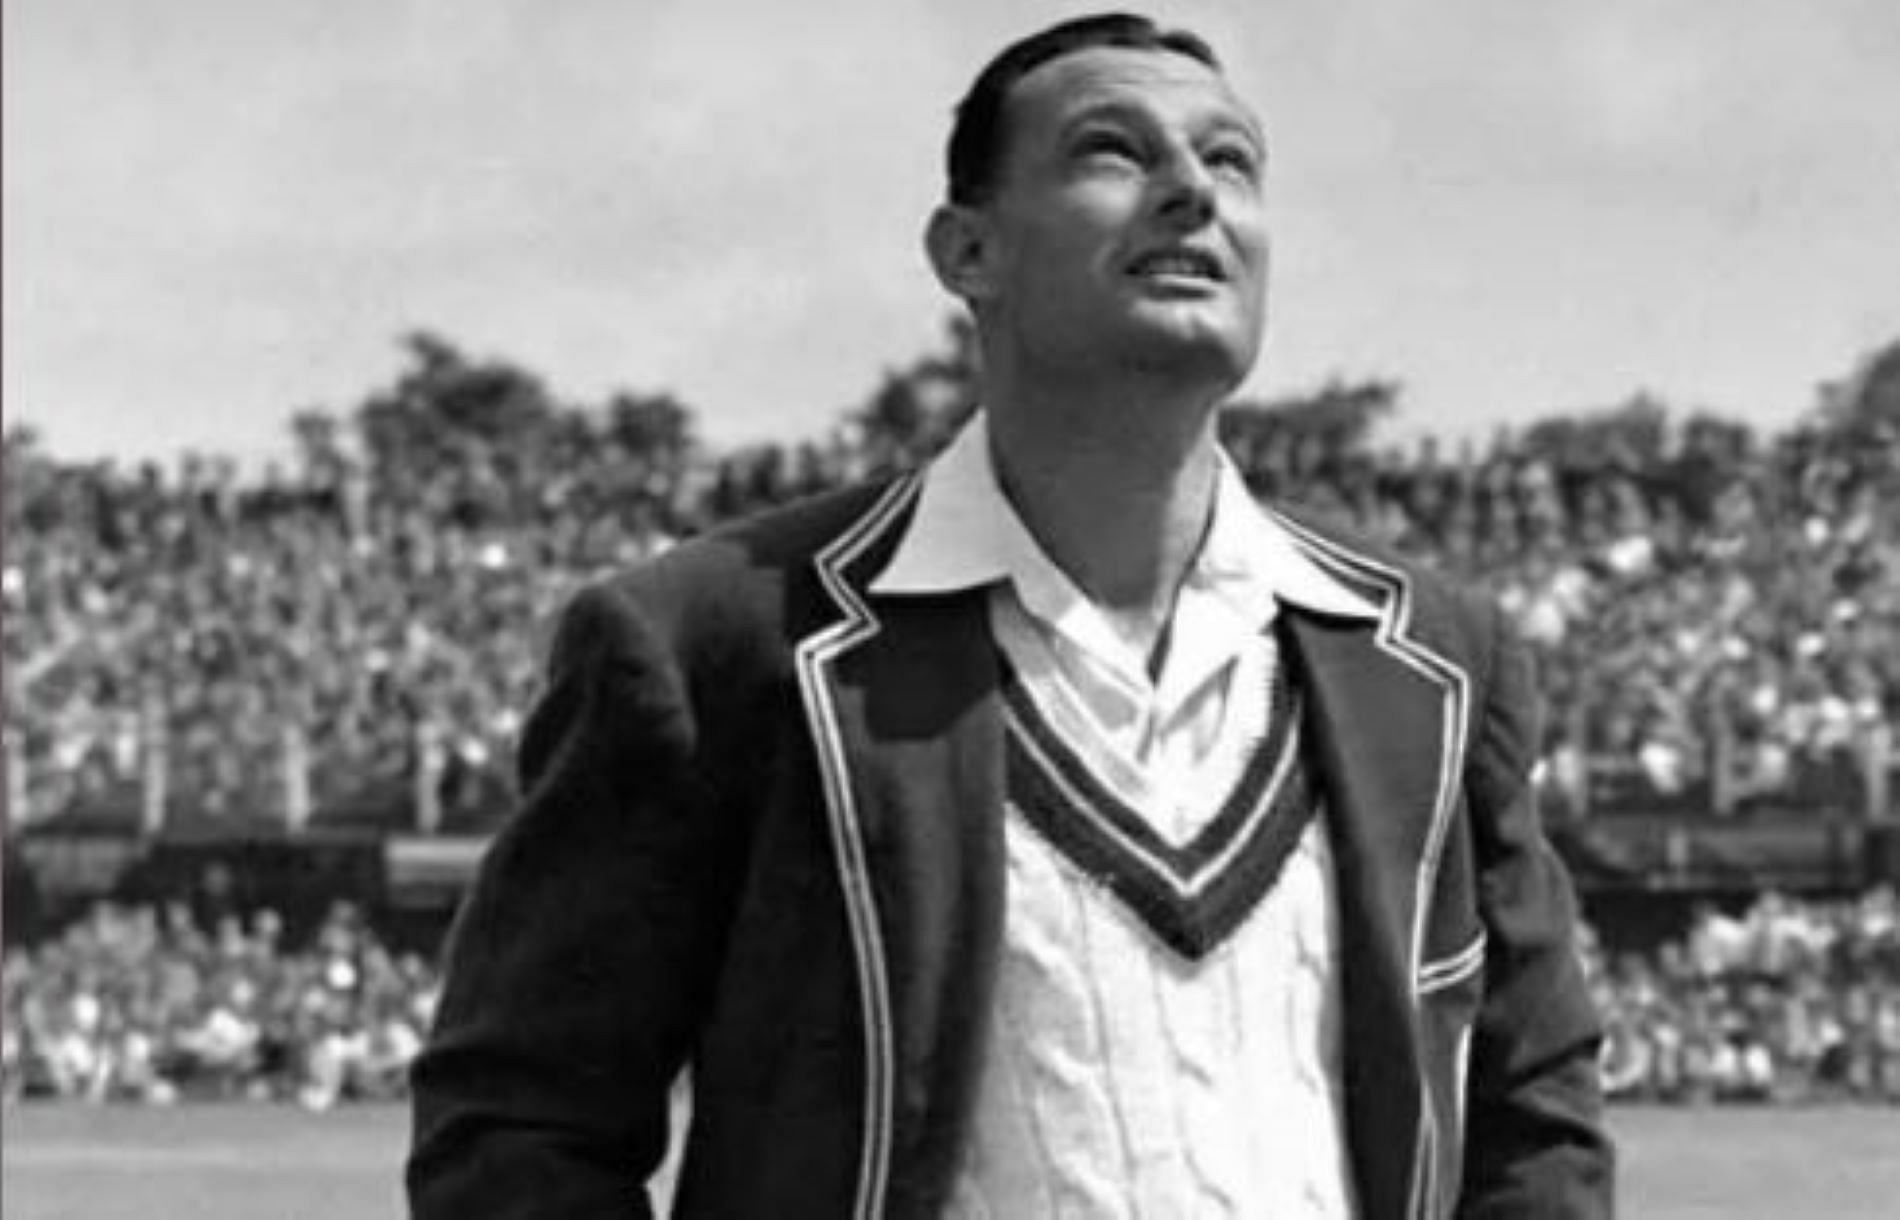 John Goddard led West Indies in the late 1940s and the 1950s